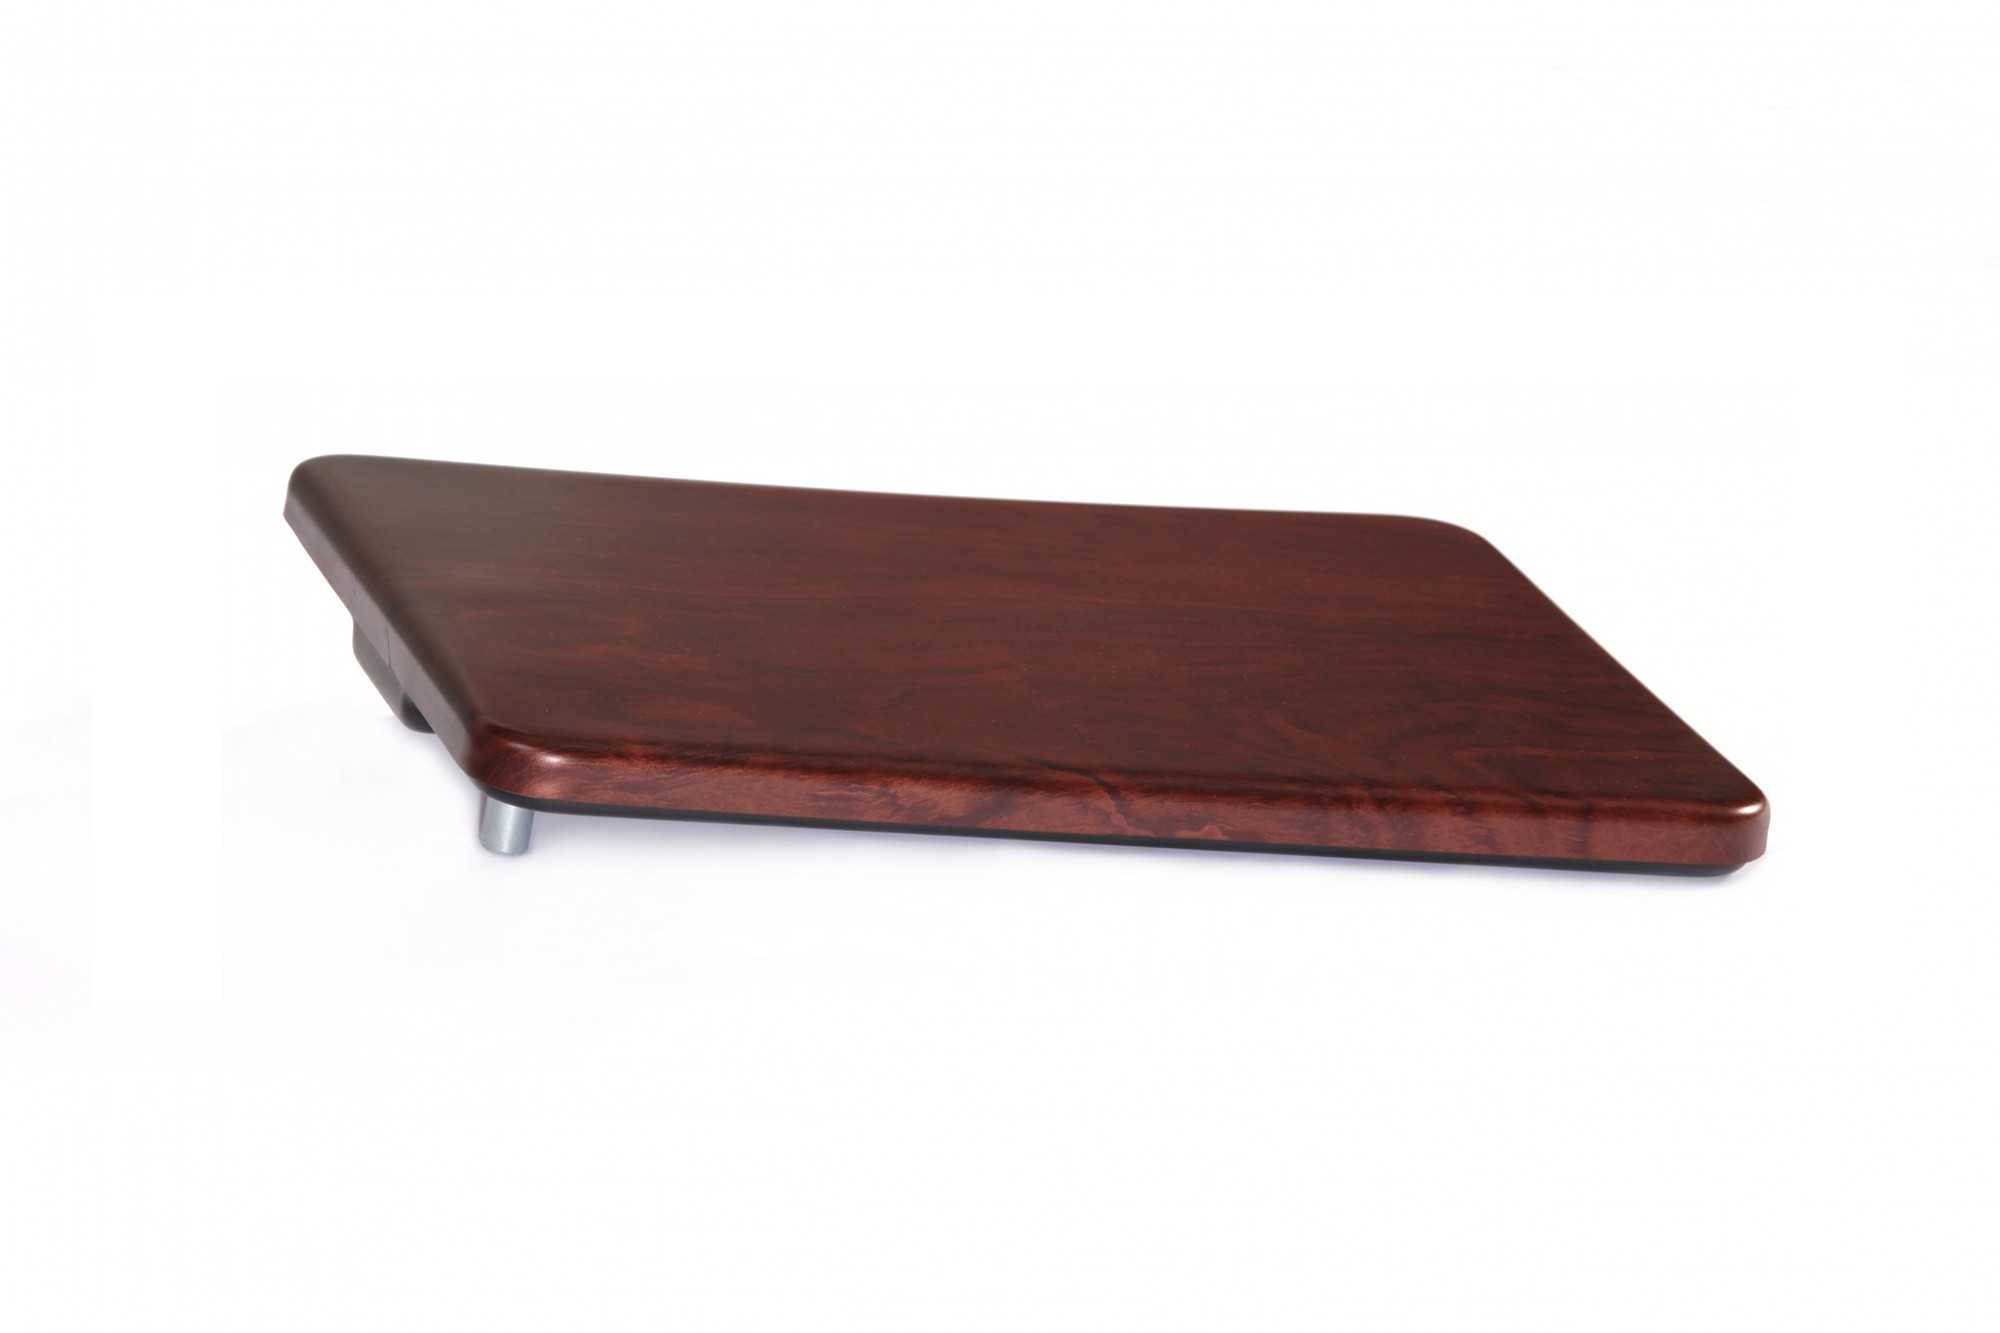 Plastic Table Top with Extended Shaft in Wood grain finish for standard grommet (no extensions needed)